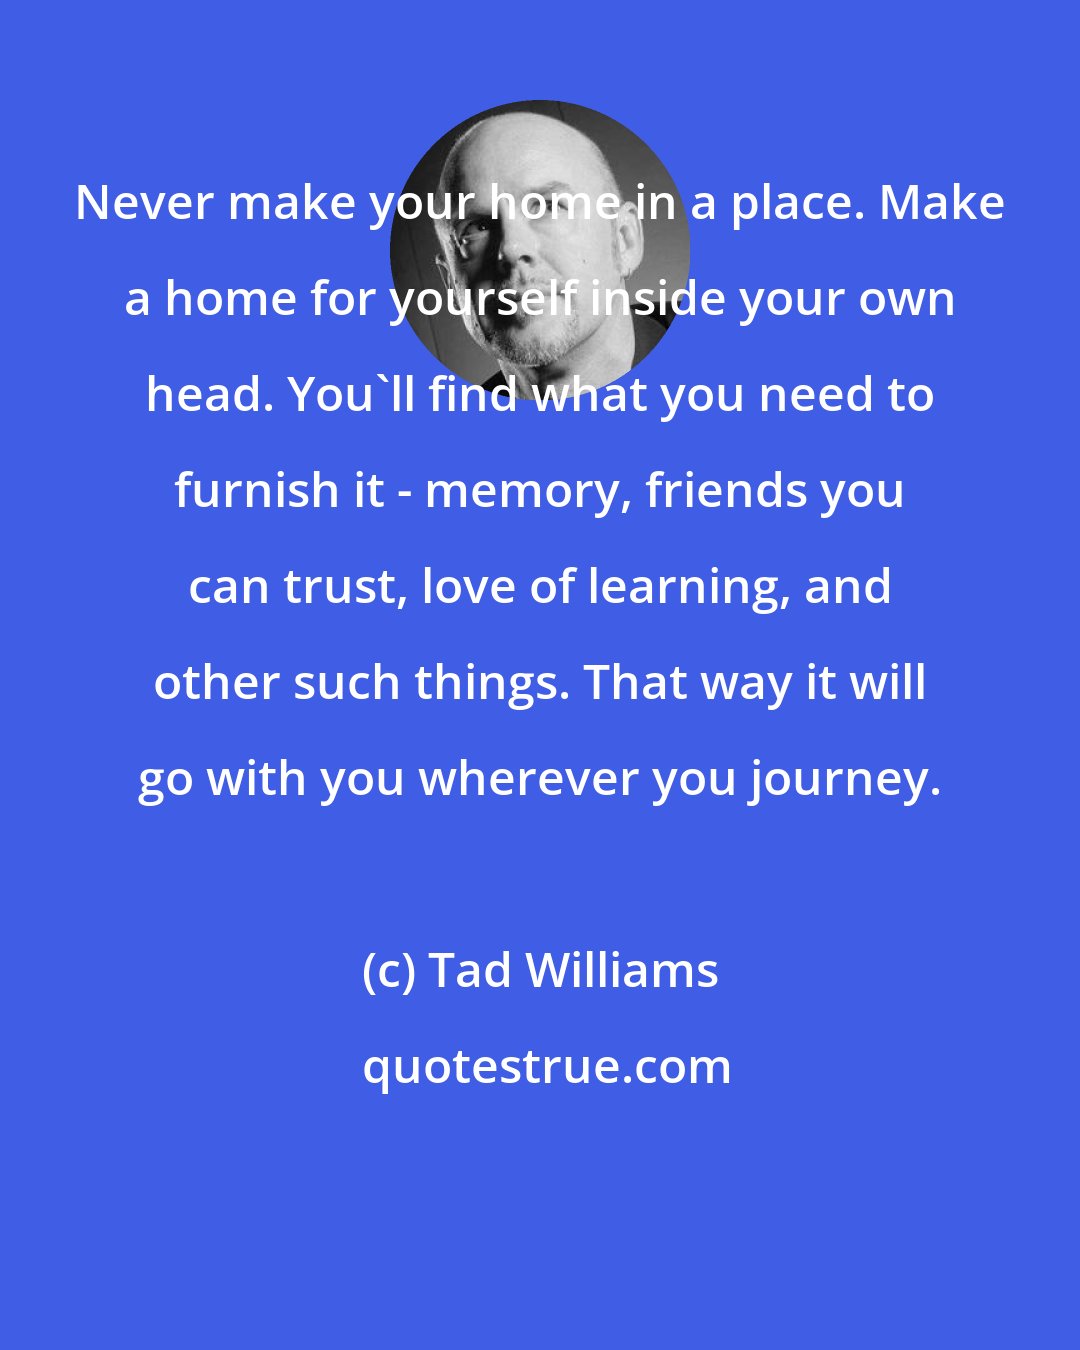 Tad Williams: Never make your home in a place. Make a home for yourself inside your own head. You'll find what you need to furnish it - memory, friends you can trust, love of learning, and other such things. That way it will go with you wherever you journey.